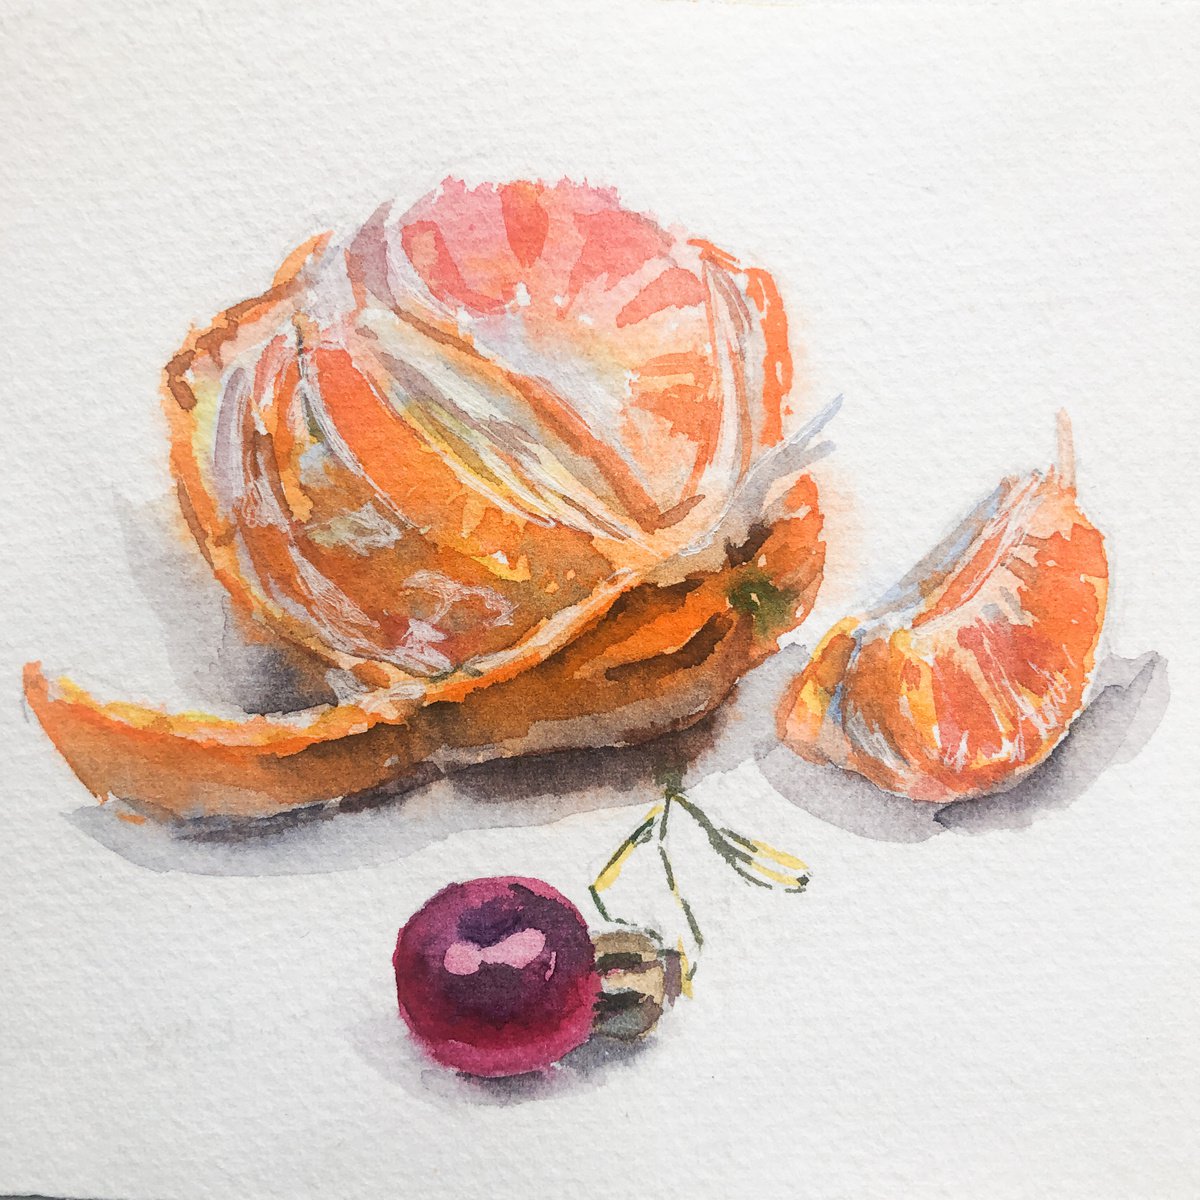 Tangerine with christmas ball | little watercolor etude by Nataliia Nosyk